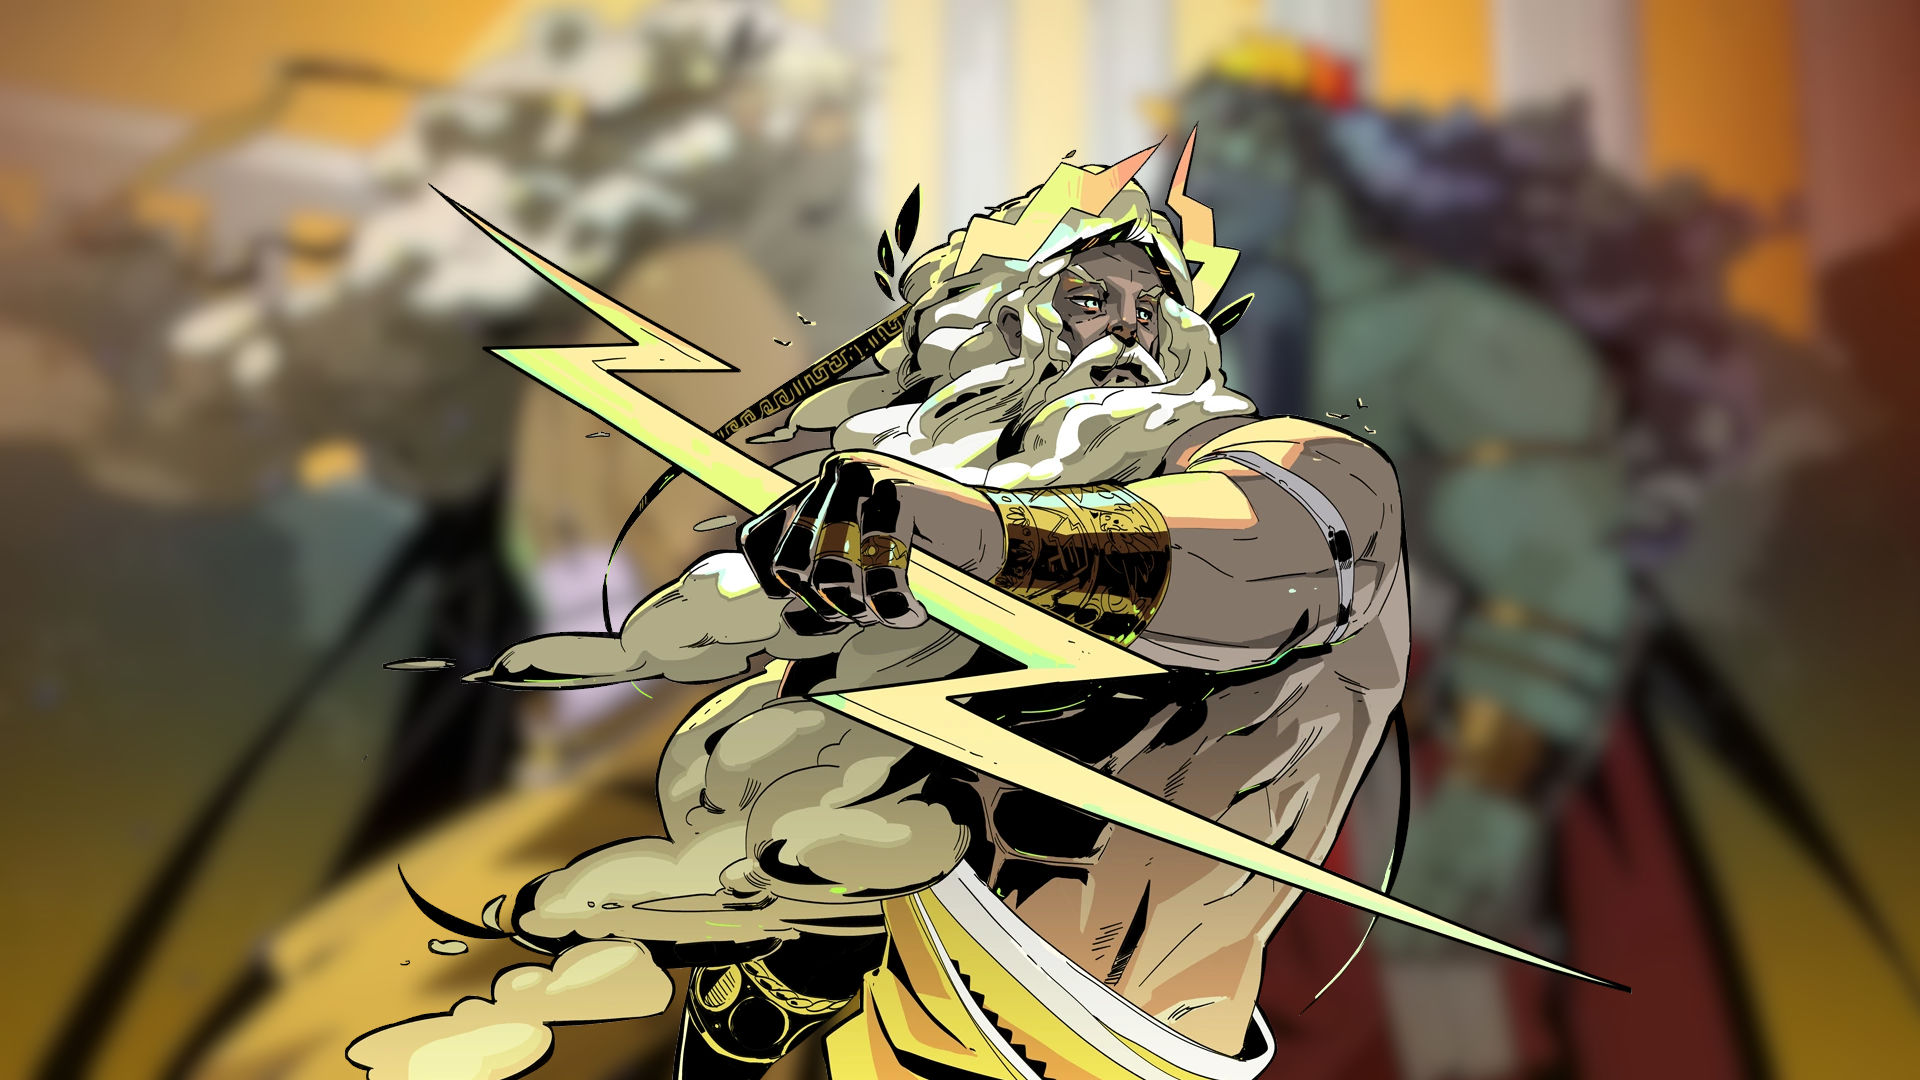 Key art of Zeus, one of the many Hades characters